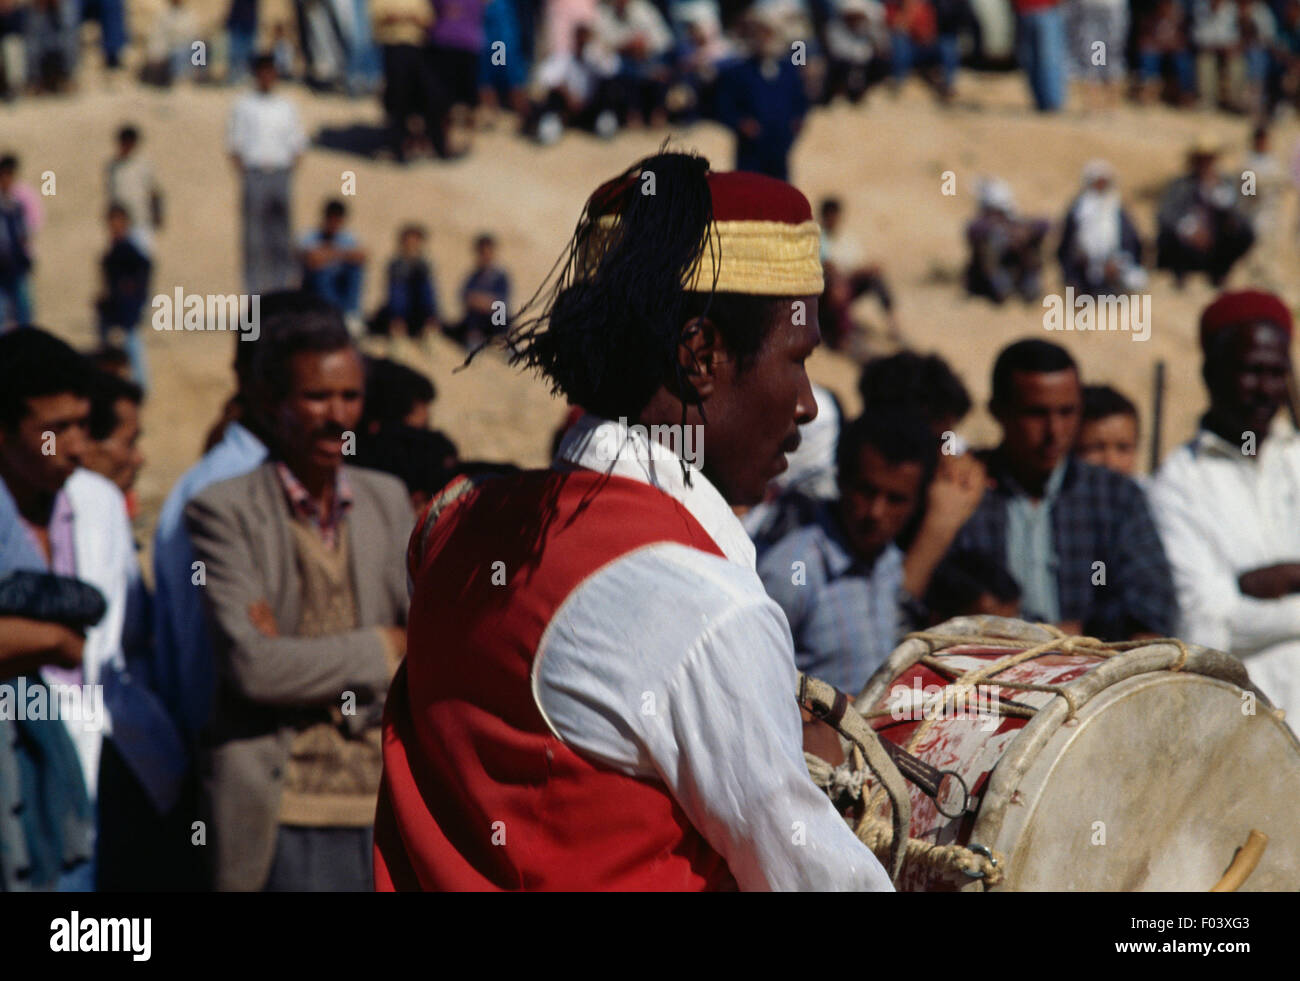 Man in traditional clothes playing the drum, Matmata Berber festival, Tunisia. Stock Photo